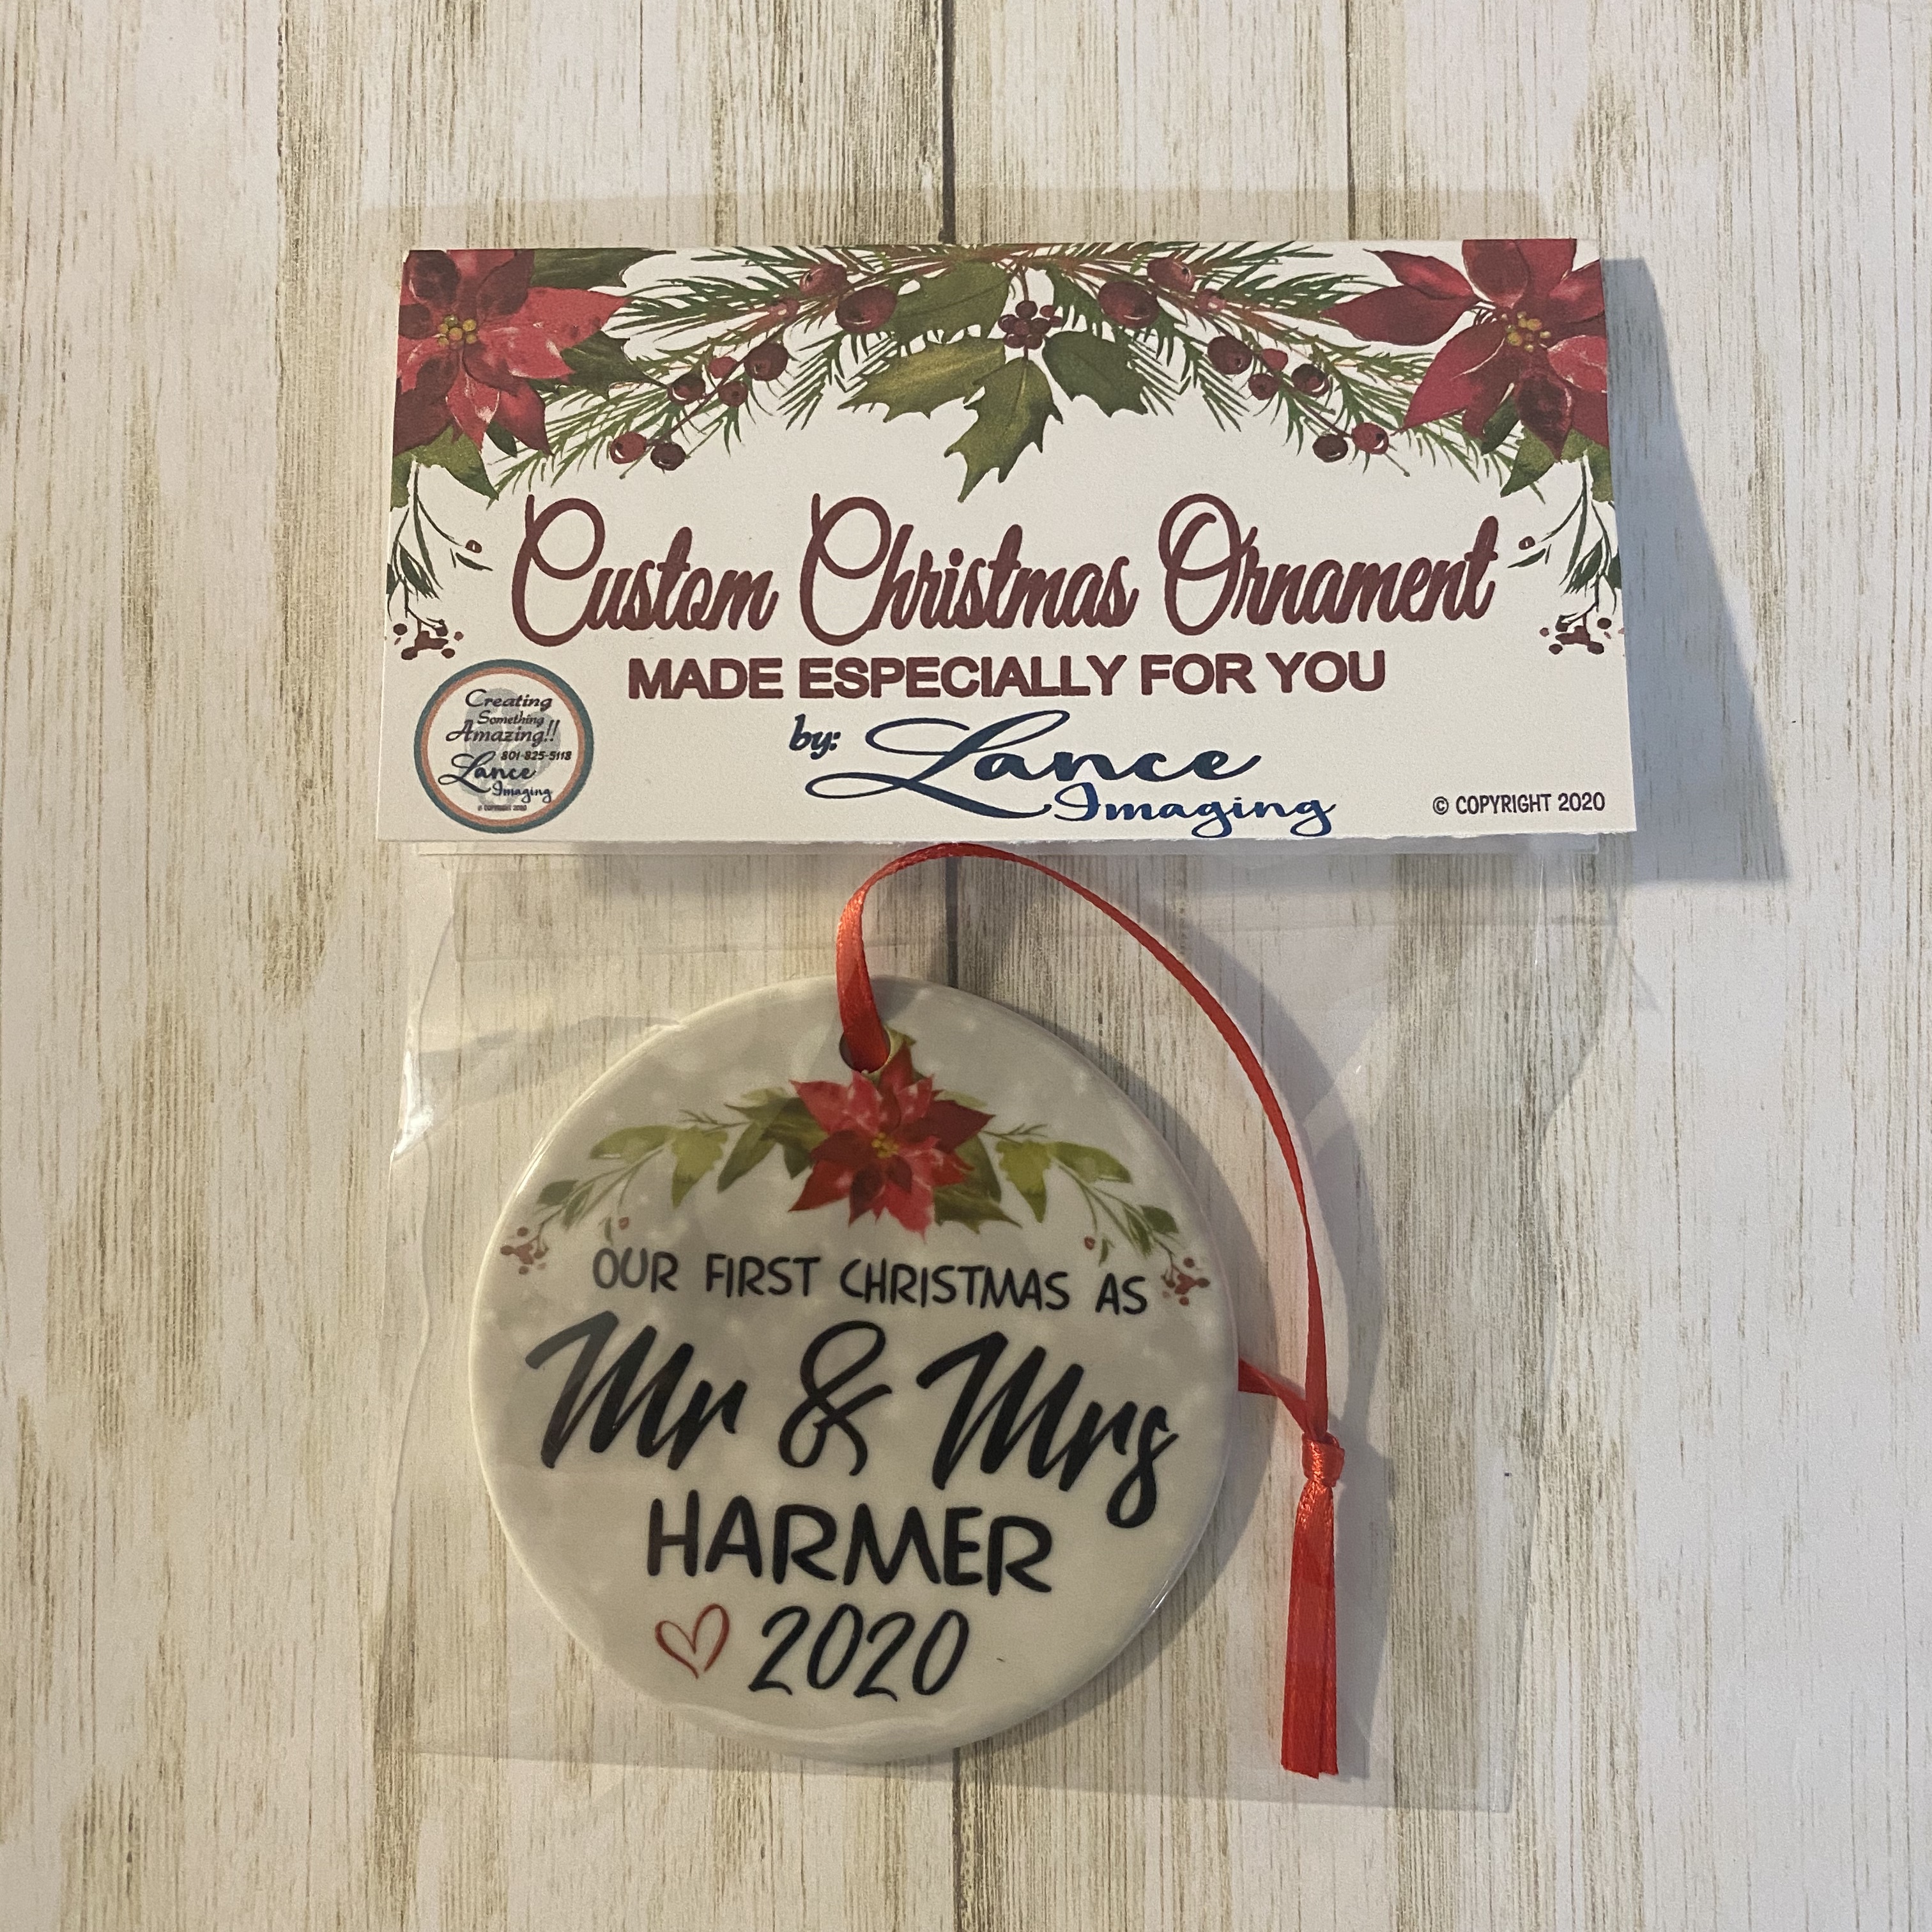 I wanted a cute way to give my customers their Christmas ornament orders so I made cute little 